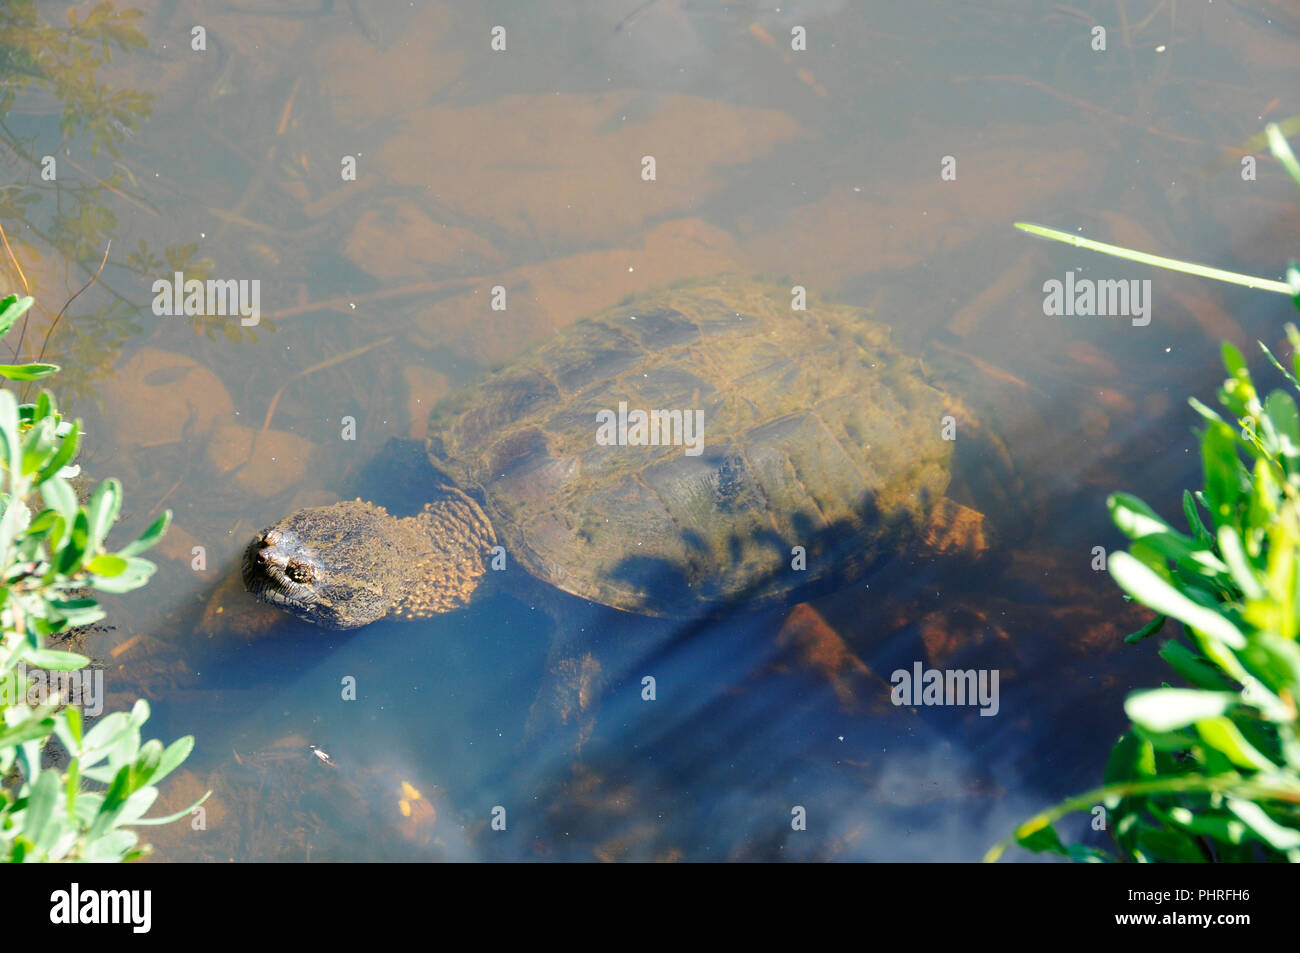 Snapping turtle in its environment. Stock Photo